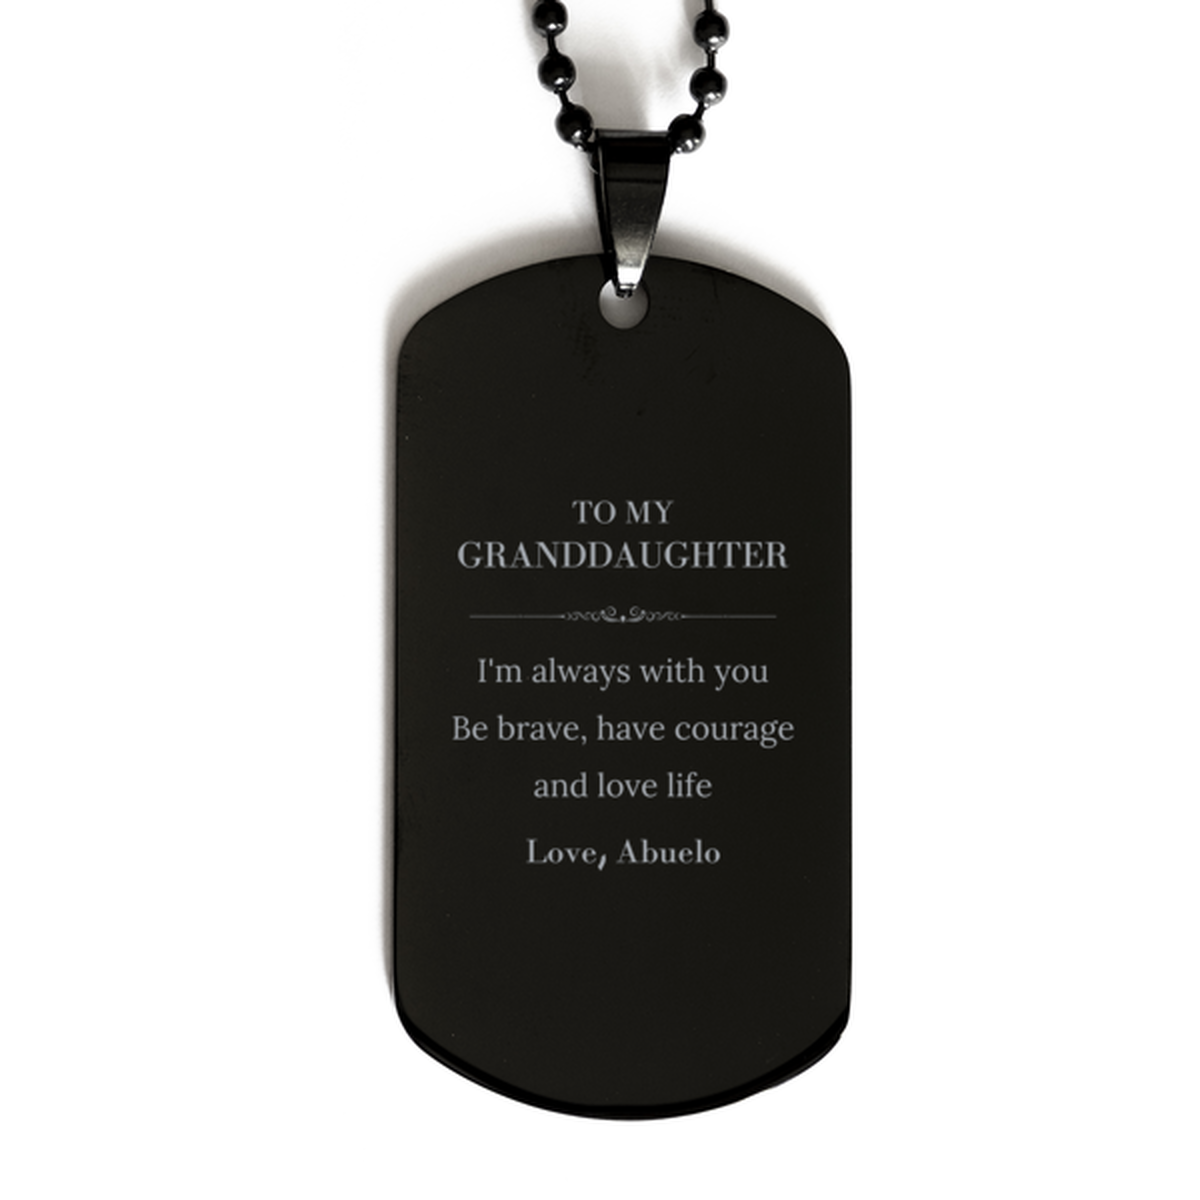 To My Granddaughter Gifts from Abuelo, Unique Black Dog Tag Inspirational Christmas Birthday Graduation Gifts for Granddaughter I'm always with you. Be brave, have courage and love life. Love, Abuelo